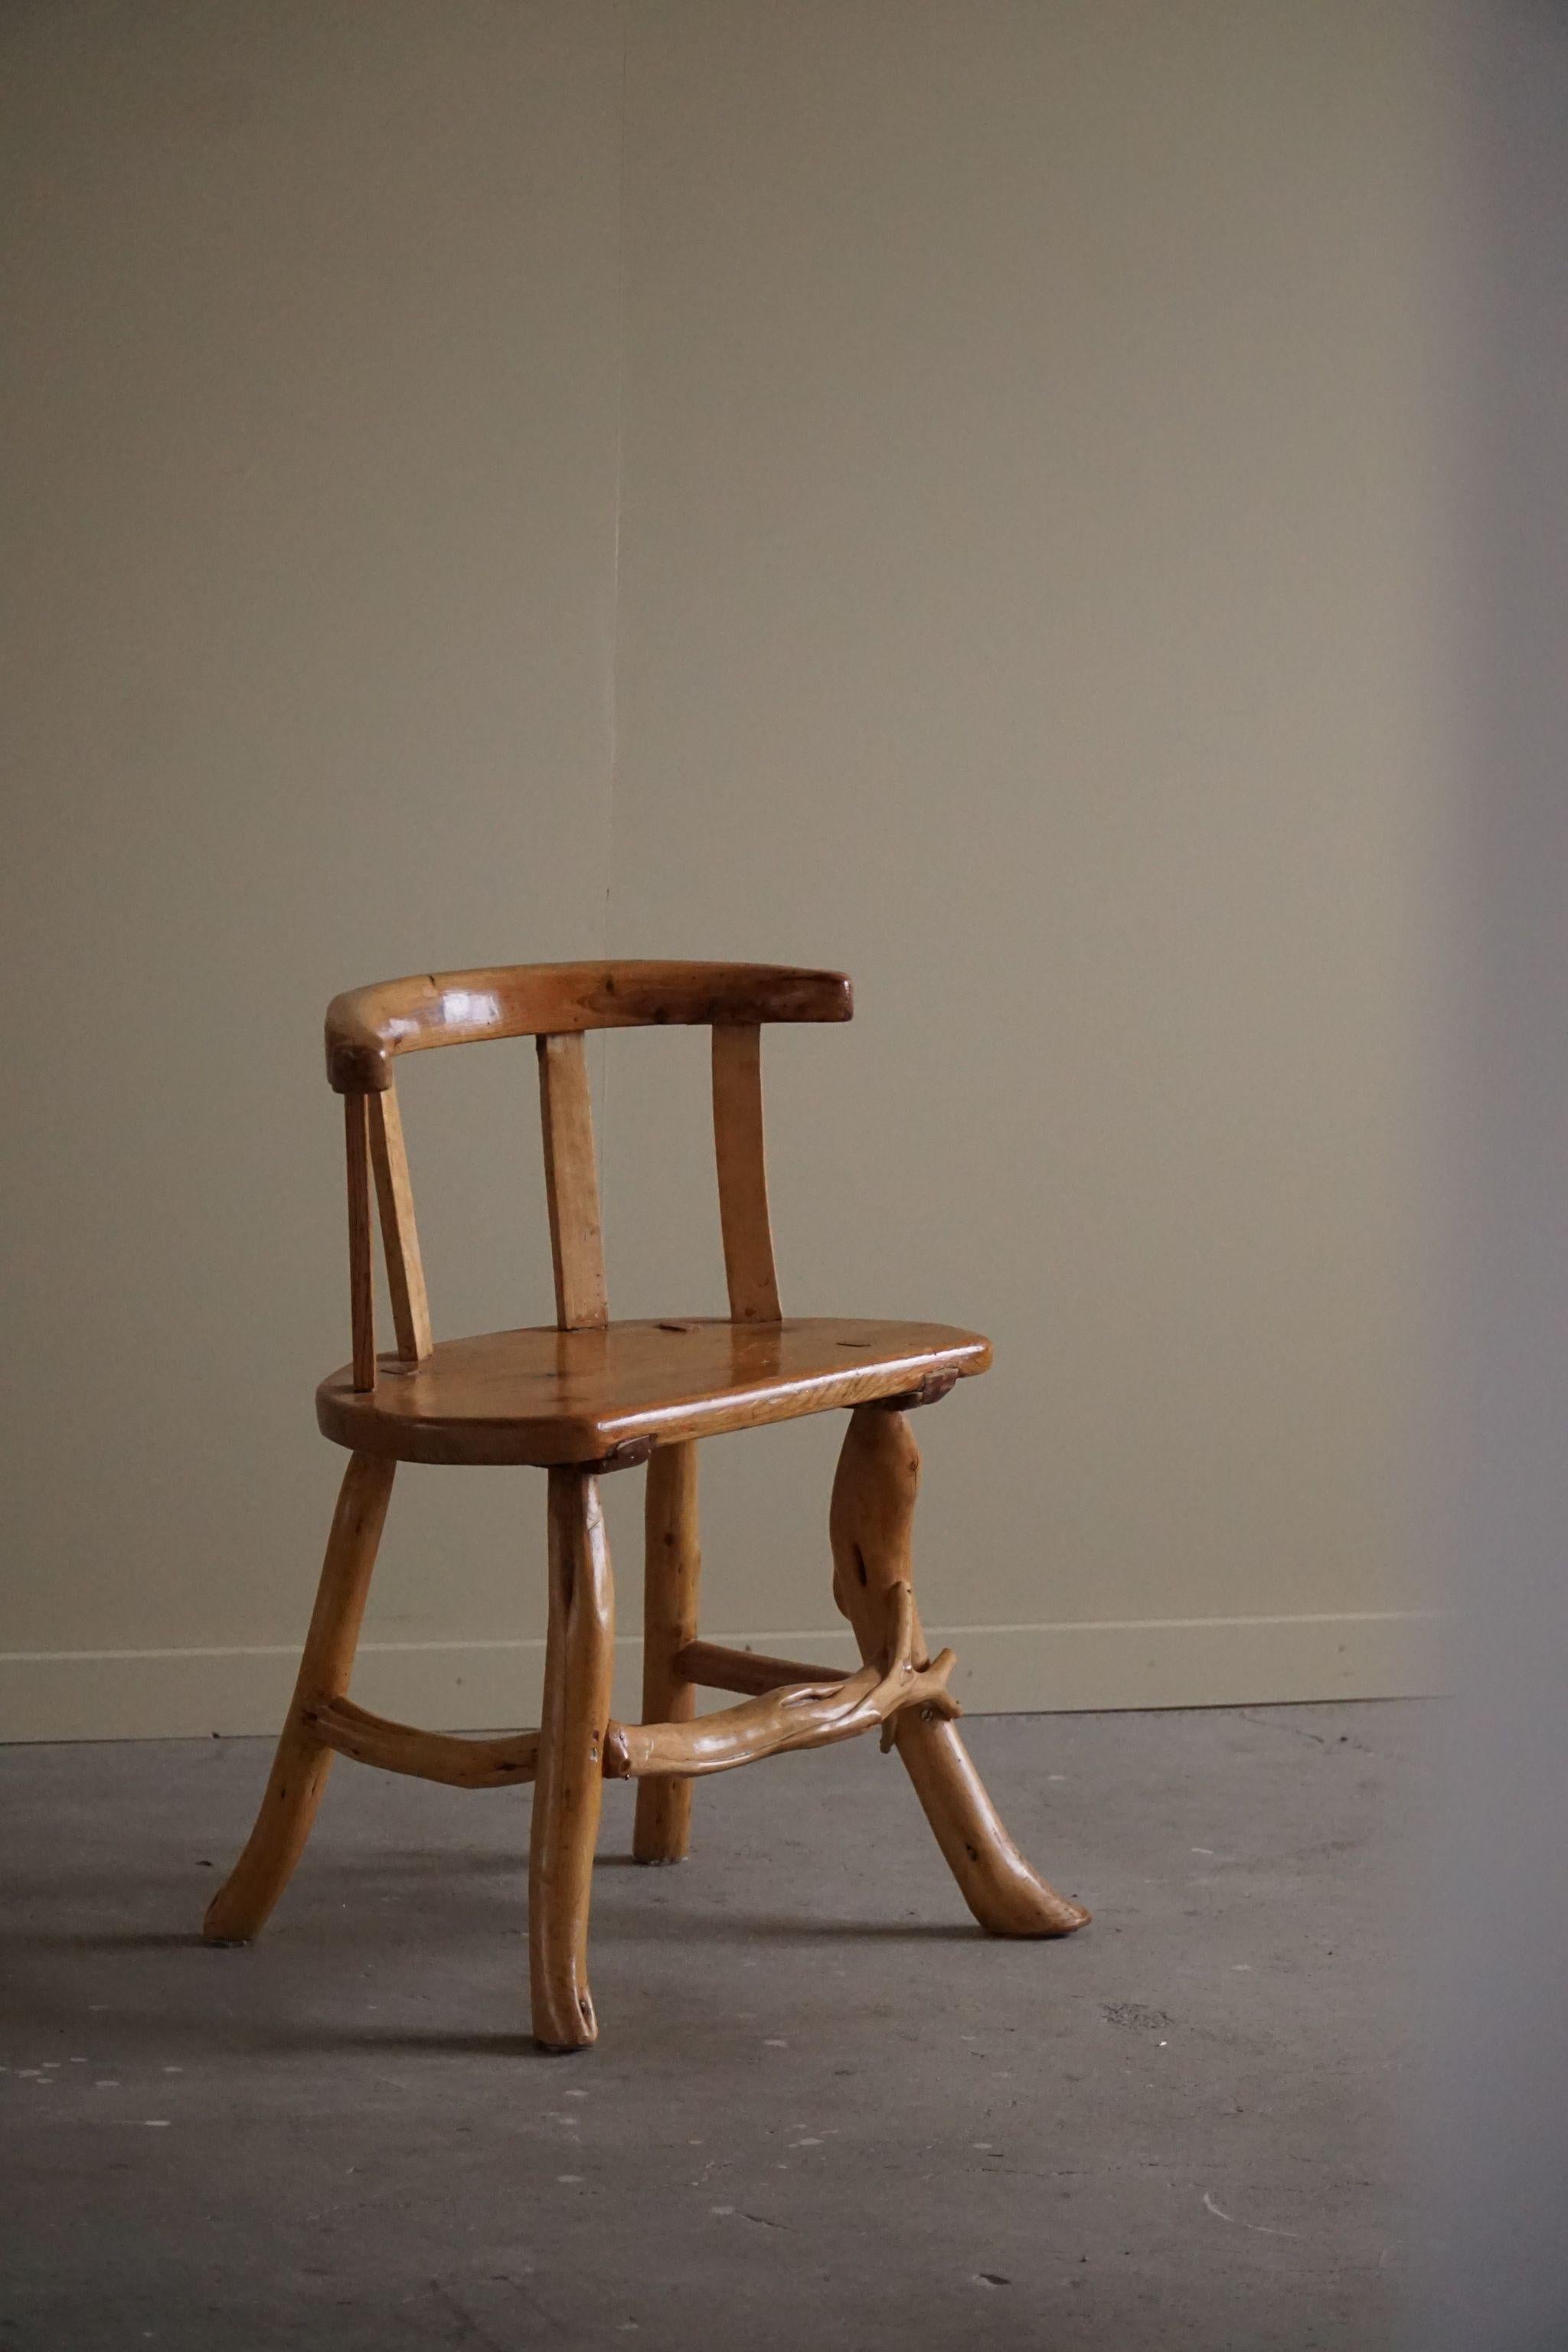 20th Century Wabi Sabi Chair in Solid Pine, Handcrafted by a Swedish Cabinetmaker, 1950s